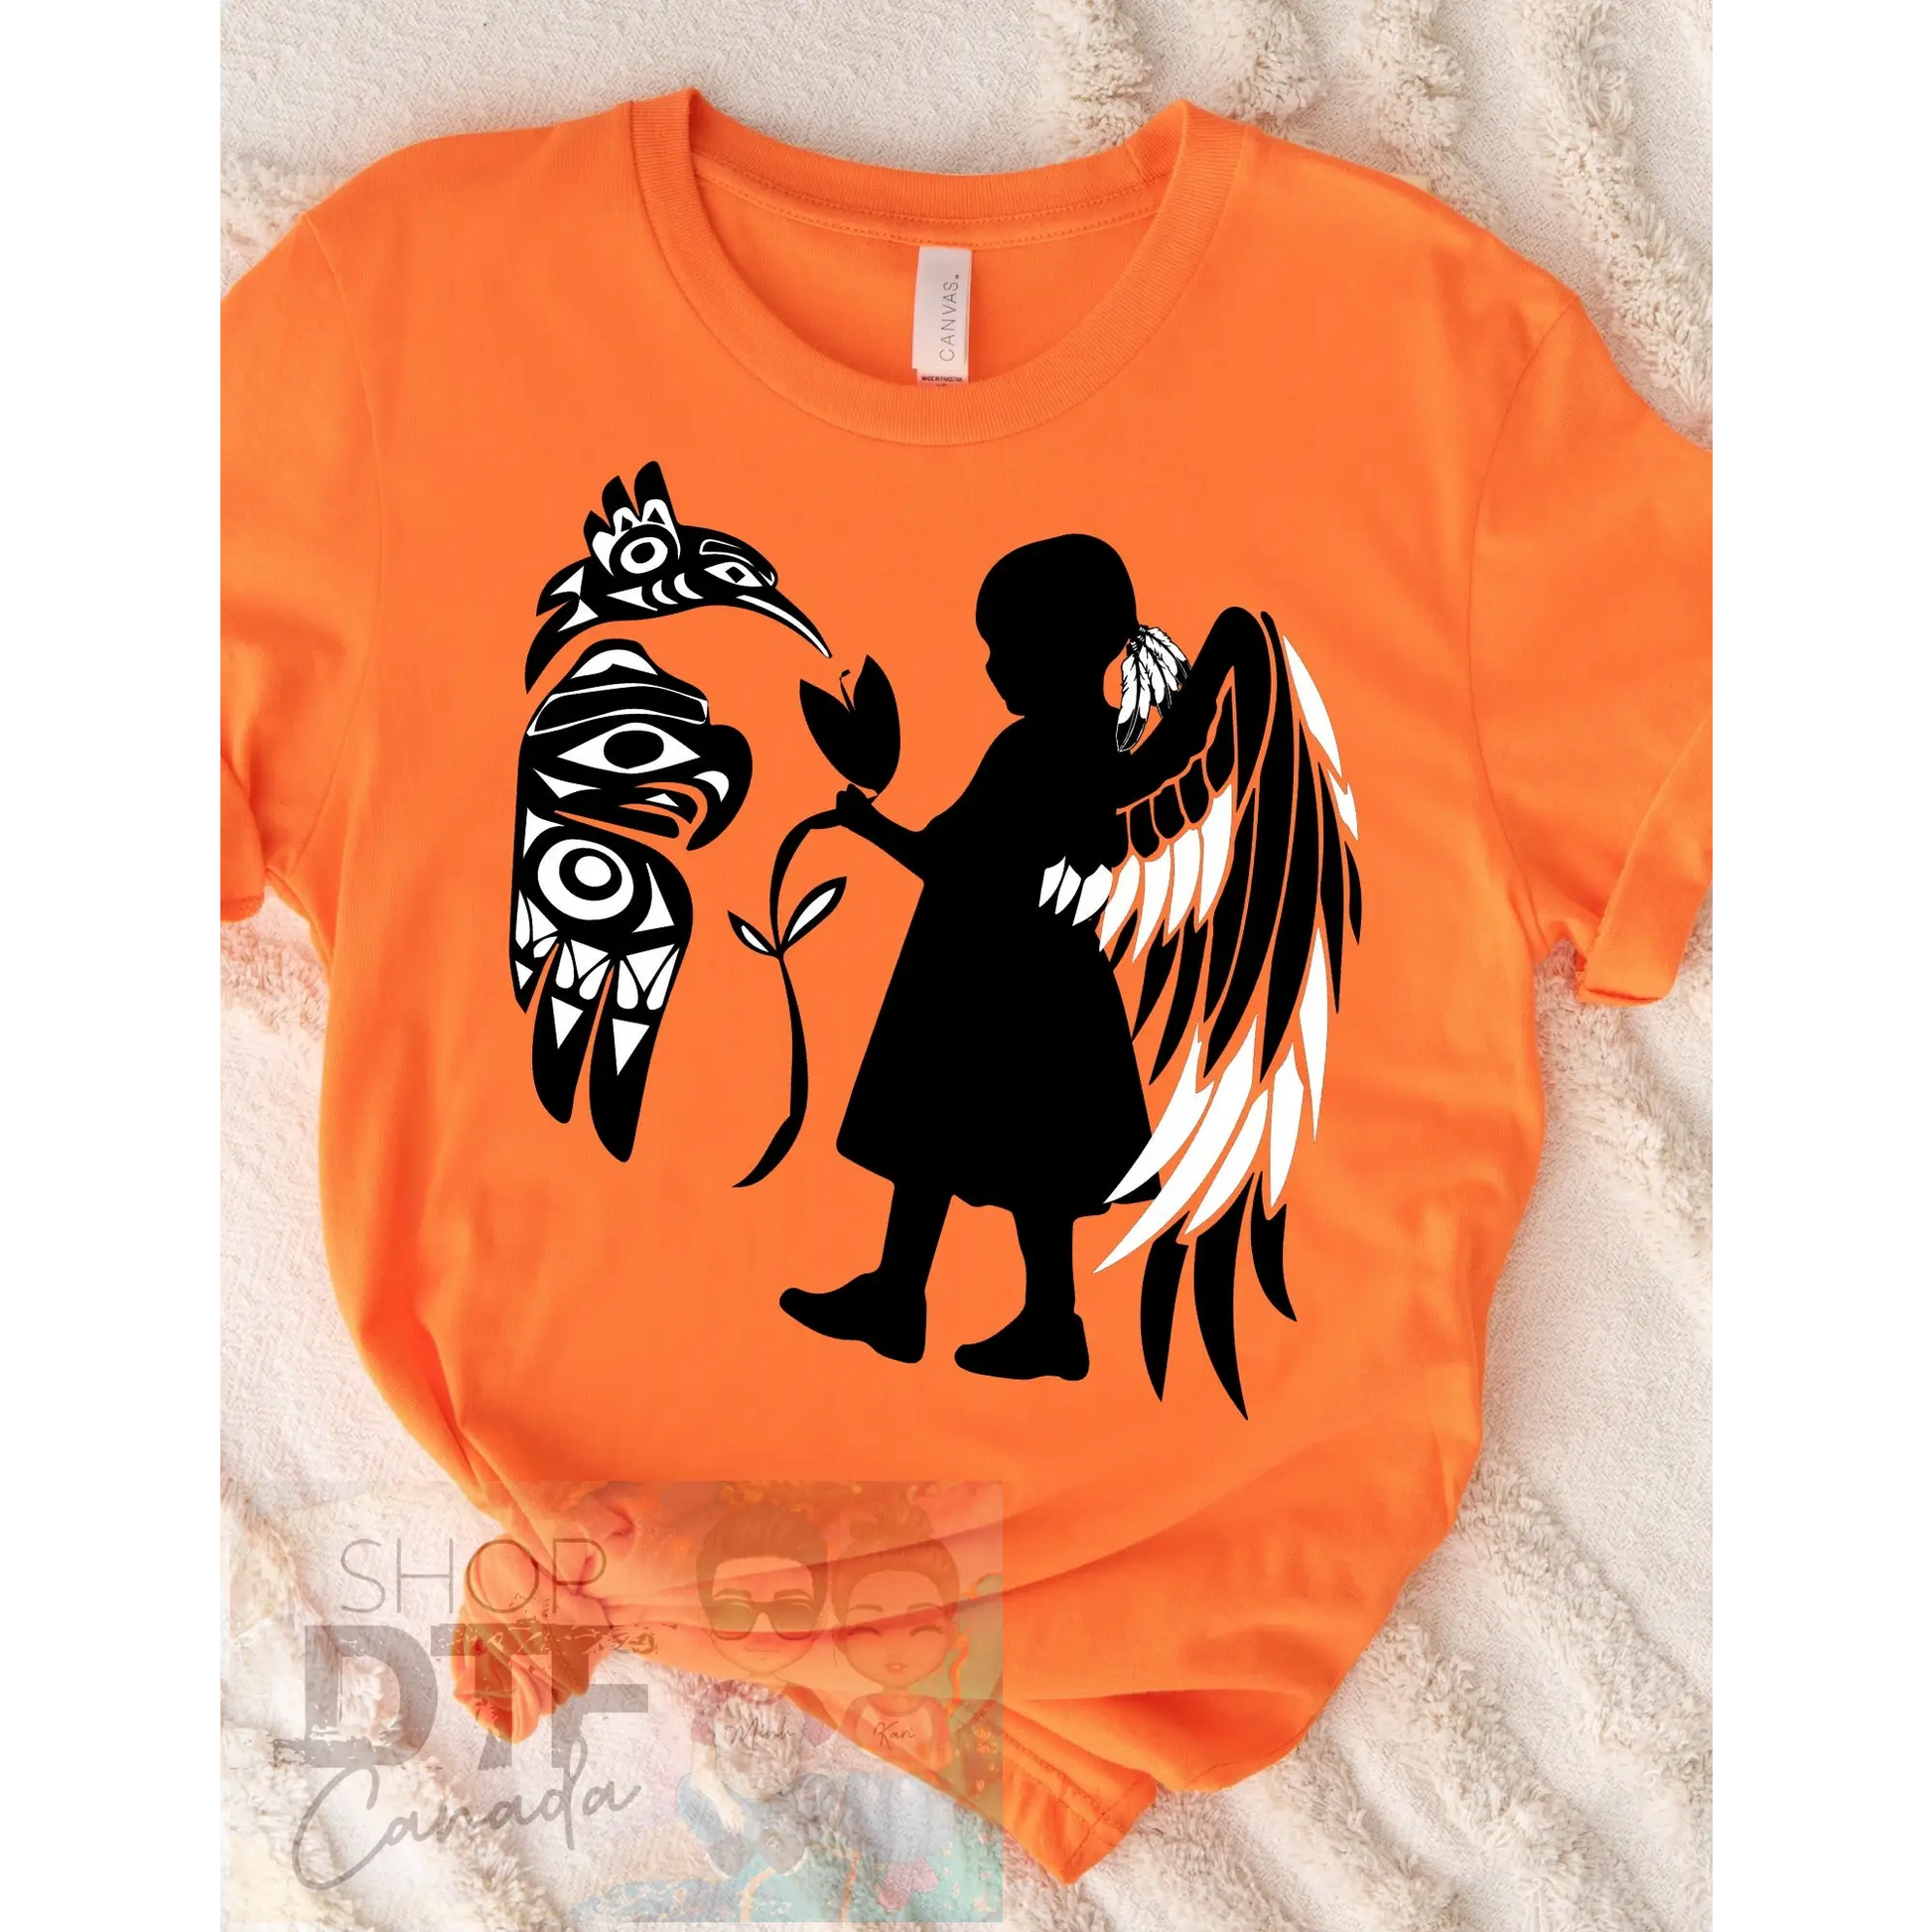 Kids - Every Child Matters - Angel wings - Shirts & Tops